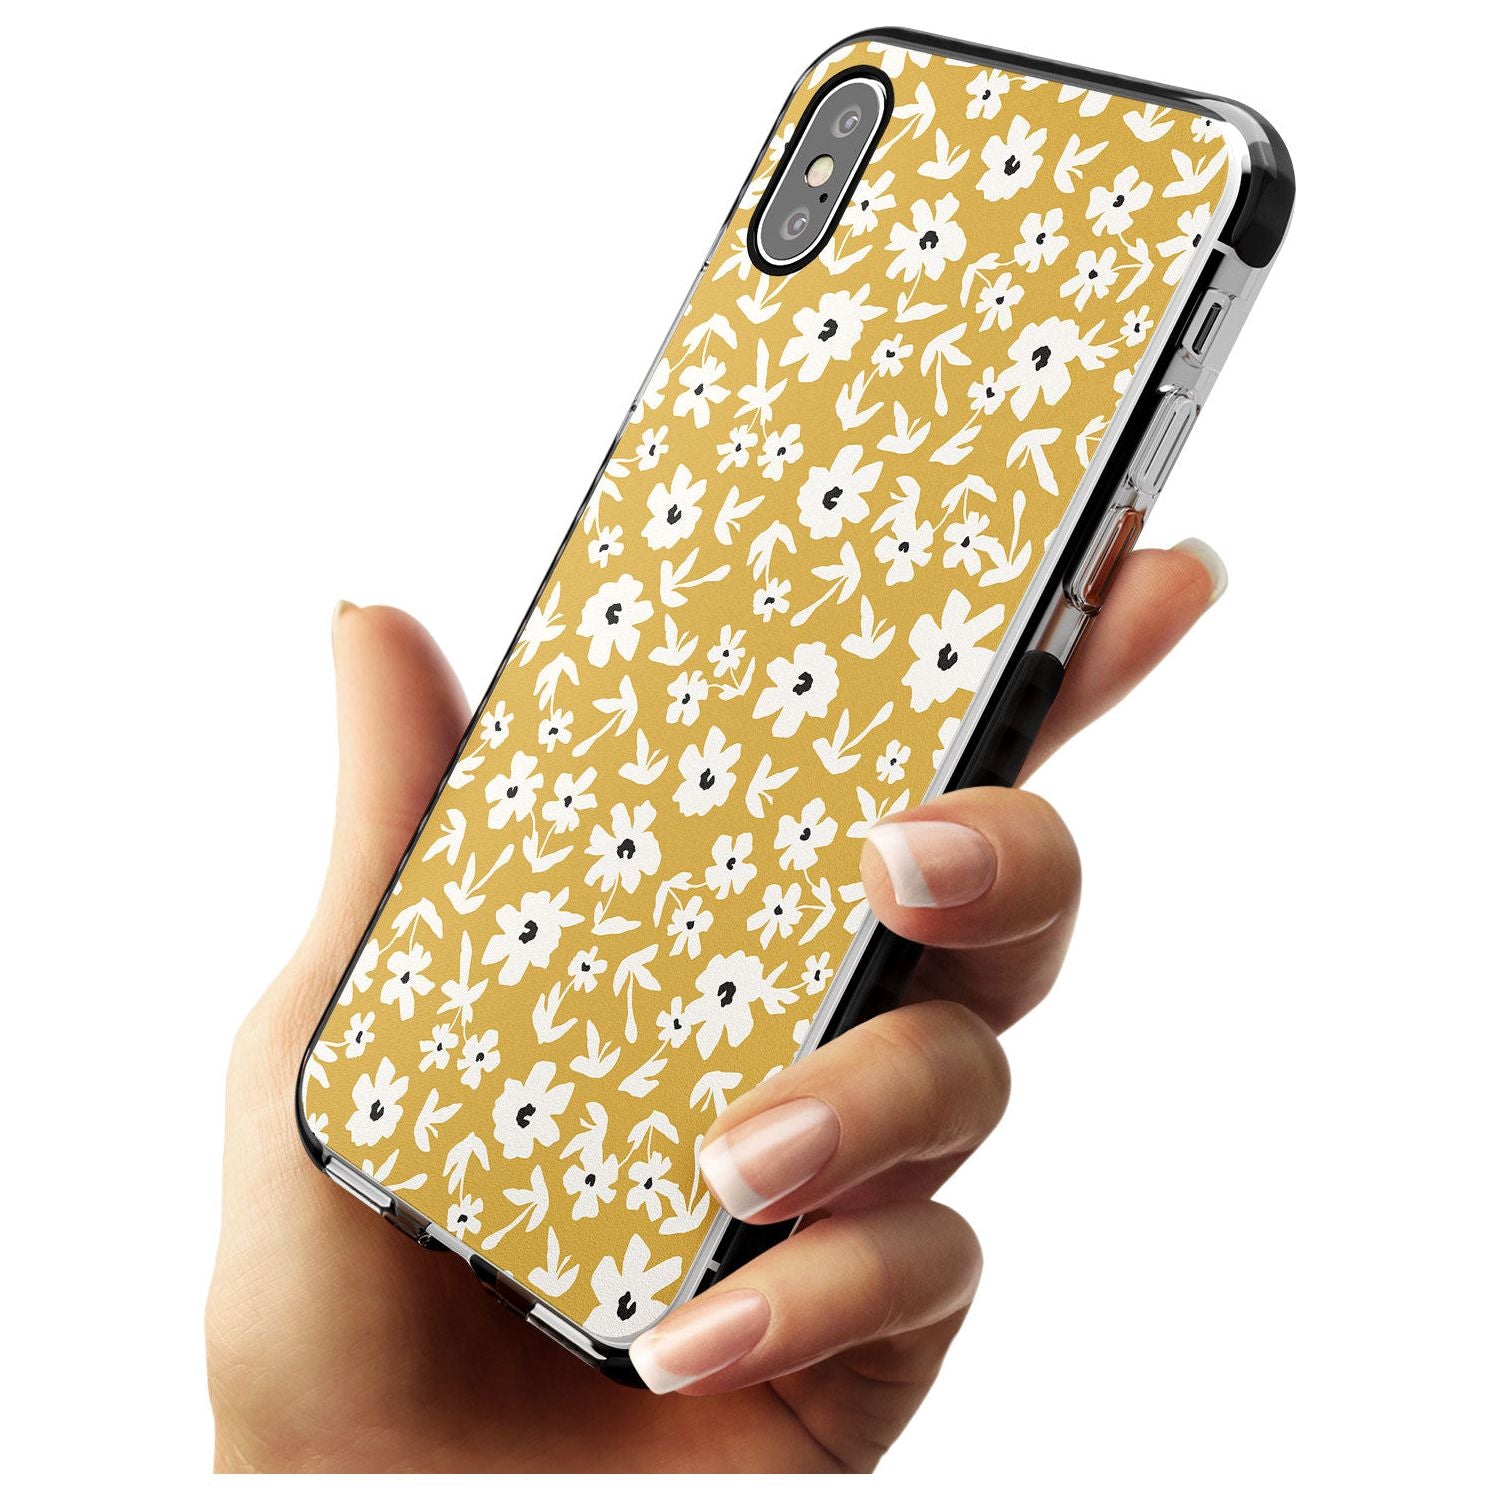 Floral Print on Mustard - Cute Floral Design Pink Fade Impact Phone Case for iPhone X XS Max XR